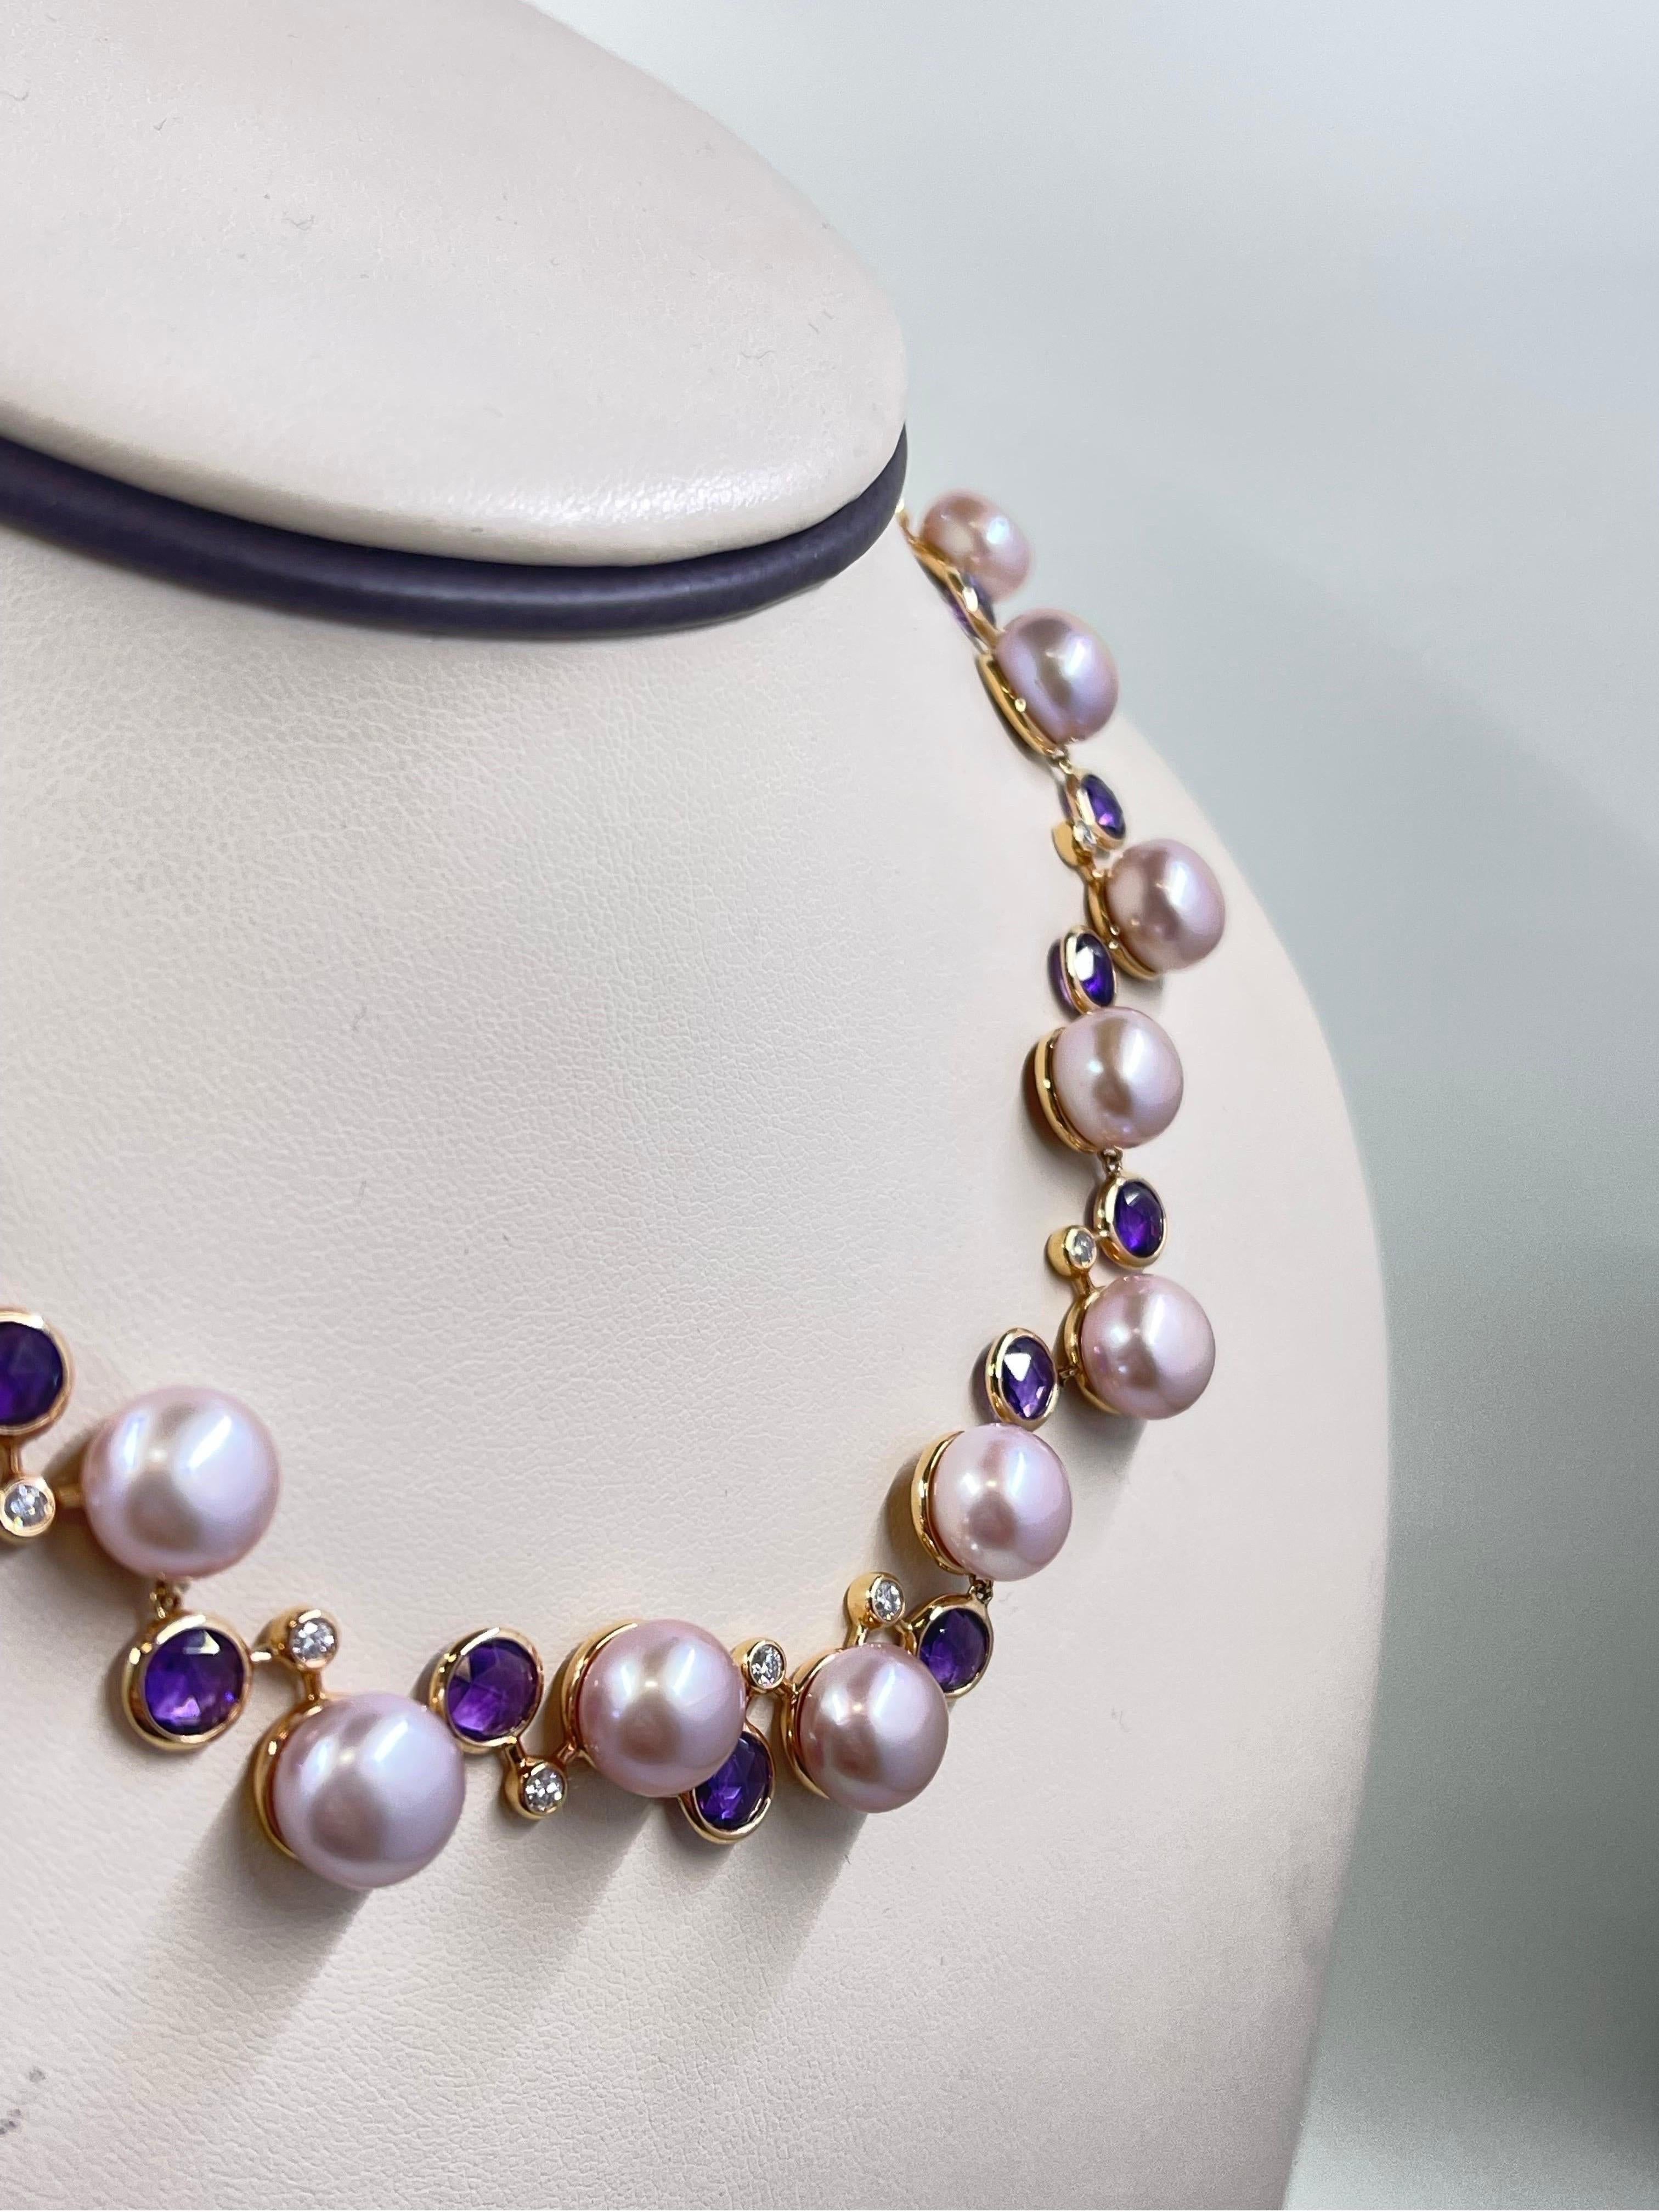 Gorgeous Pink Pearl, Amethyst And Diamond Necklace In 18k rose gold.

Length is adjustable, maximum 16” and can be adjusted to any length smaller.

Natural South Sea 15 Pink Pearls average 10mm each with Amethyst and Diamond Accents set in 18k rose